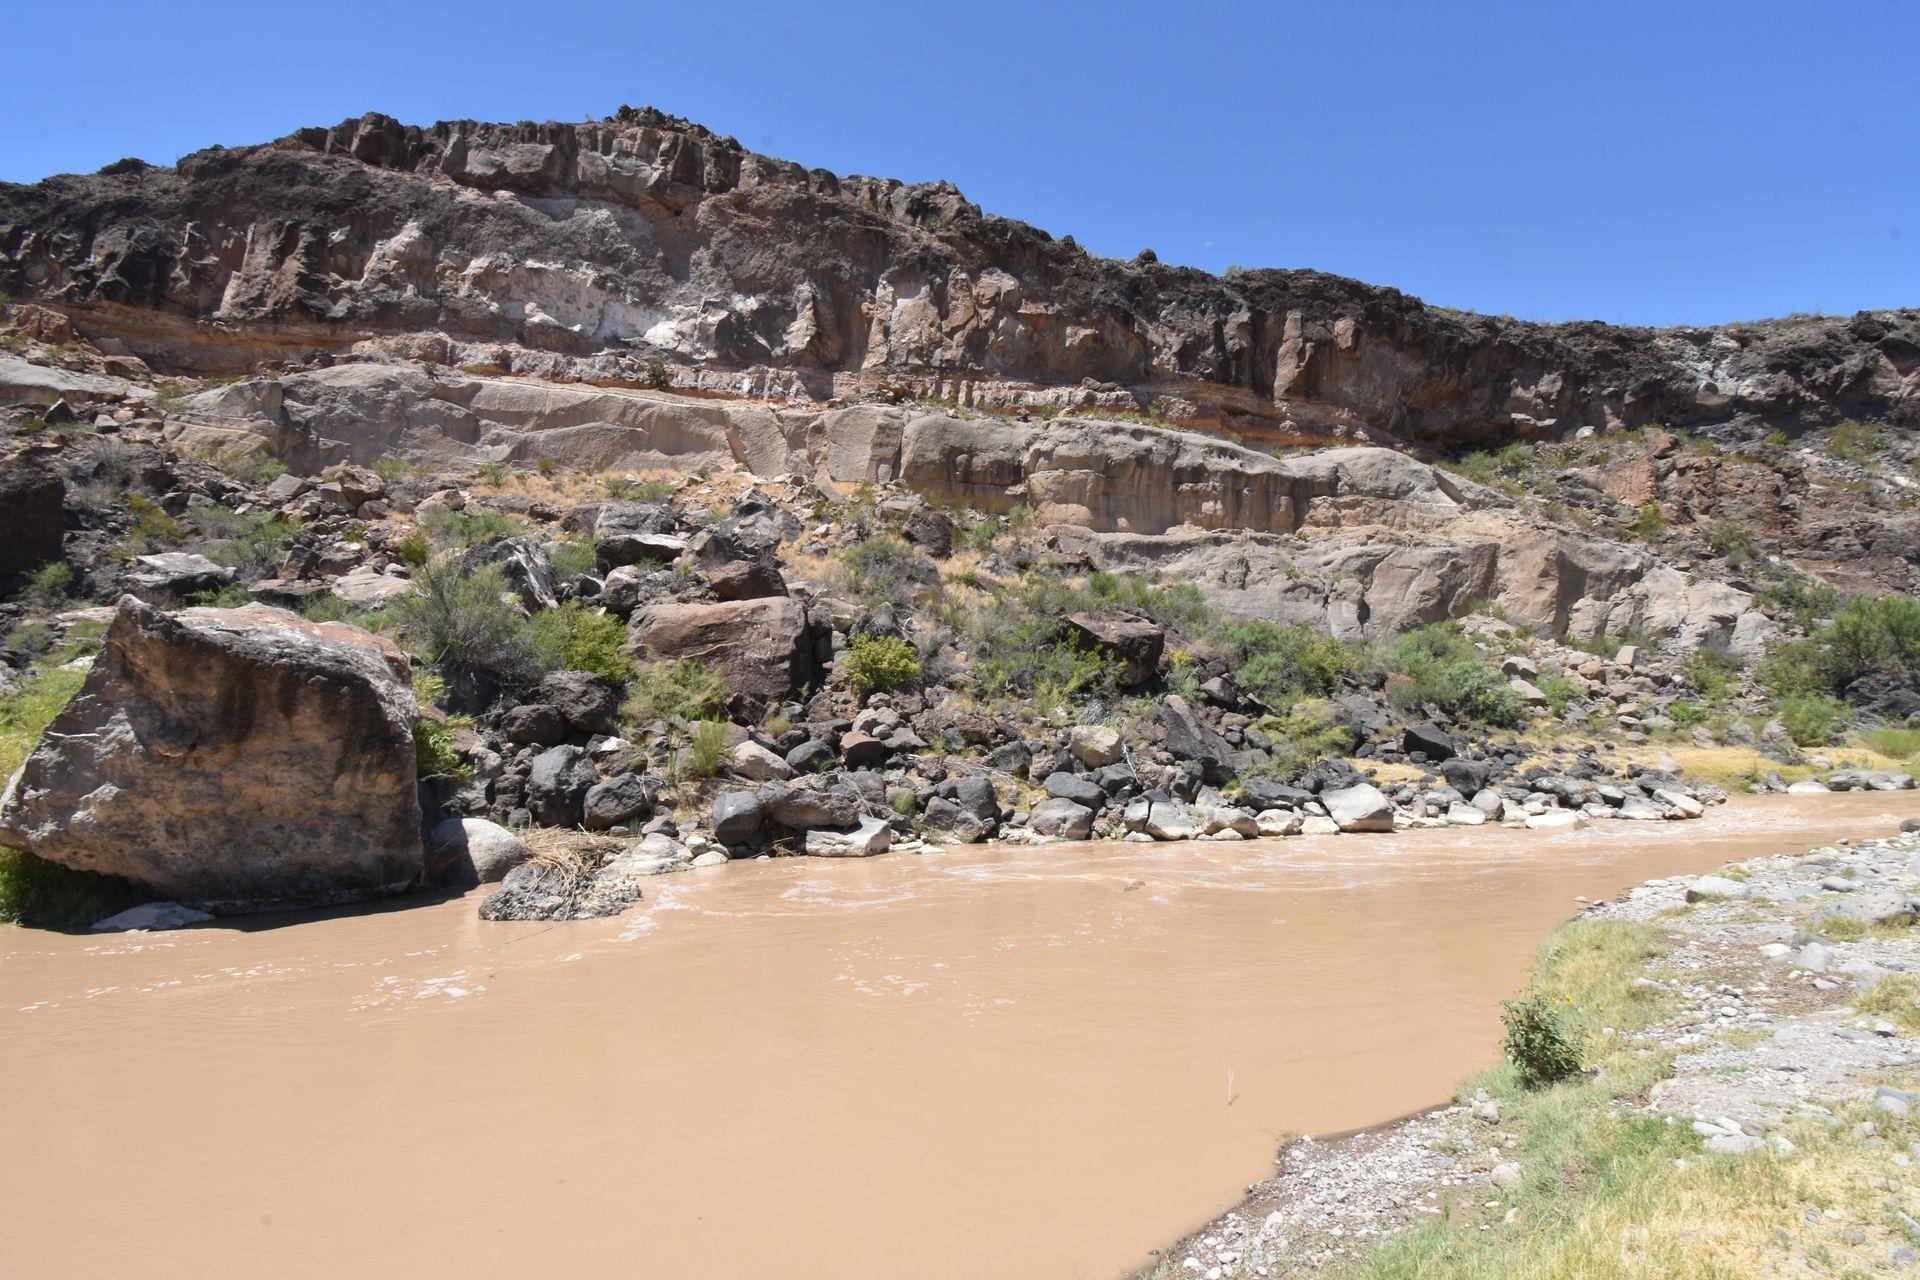 The Rio Grande river with a mountain on the other side of the river.